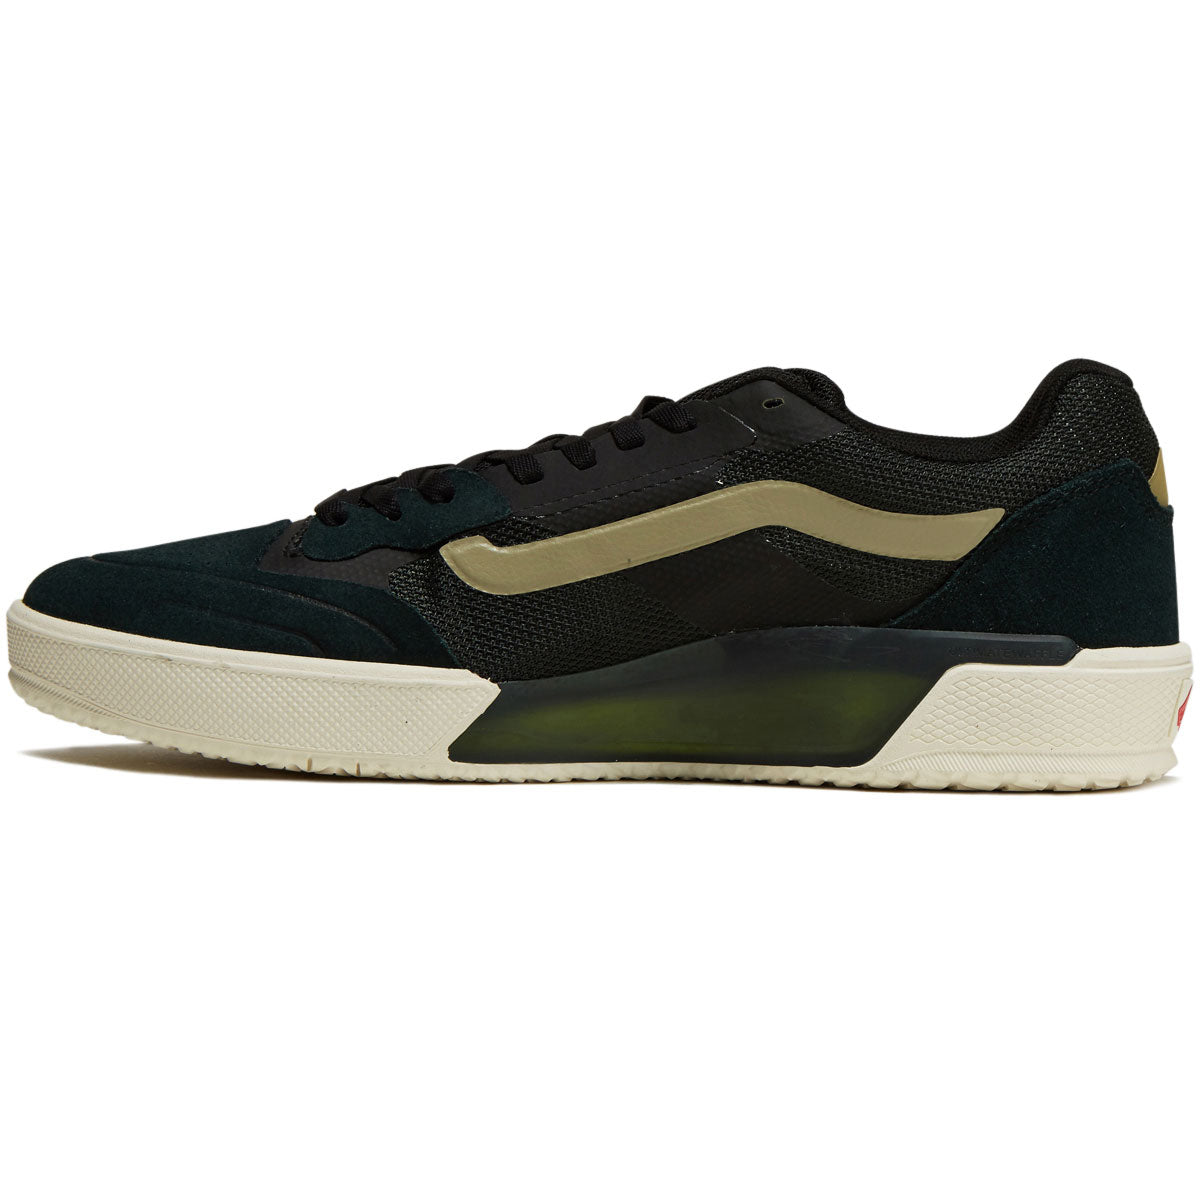 Vans AVE 2.0 Shoes - AVE Bench Green image 2